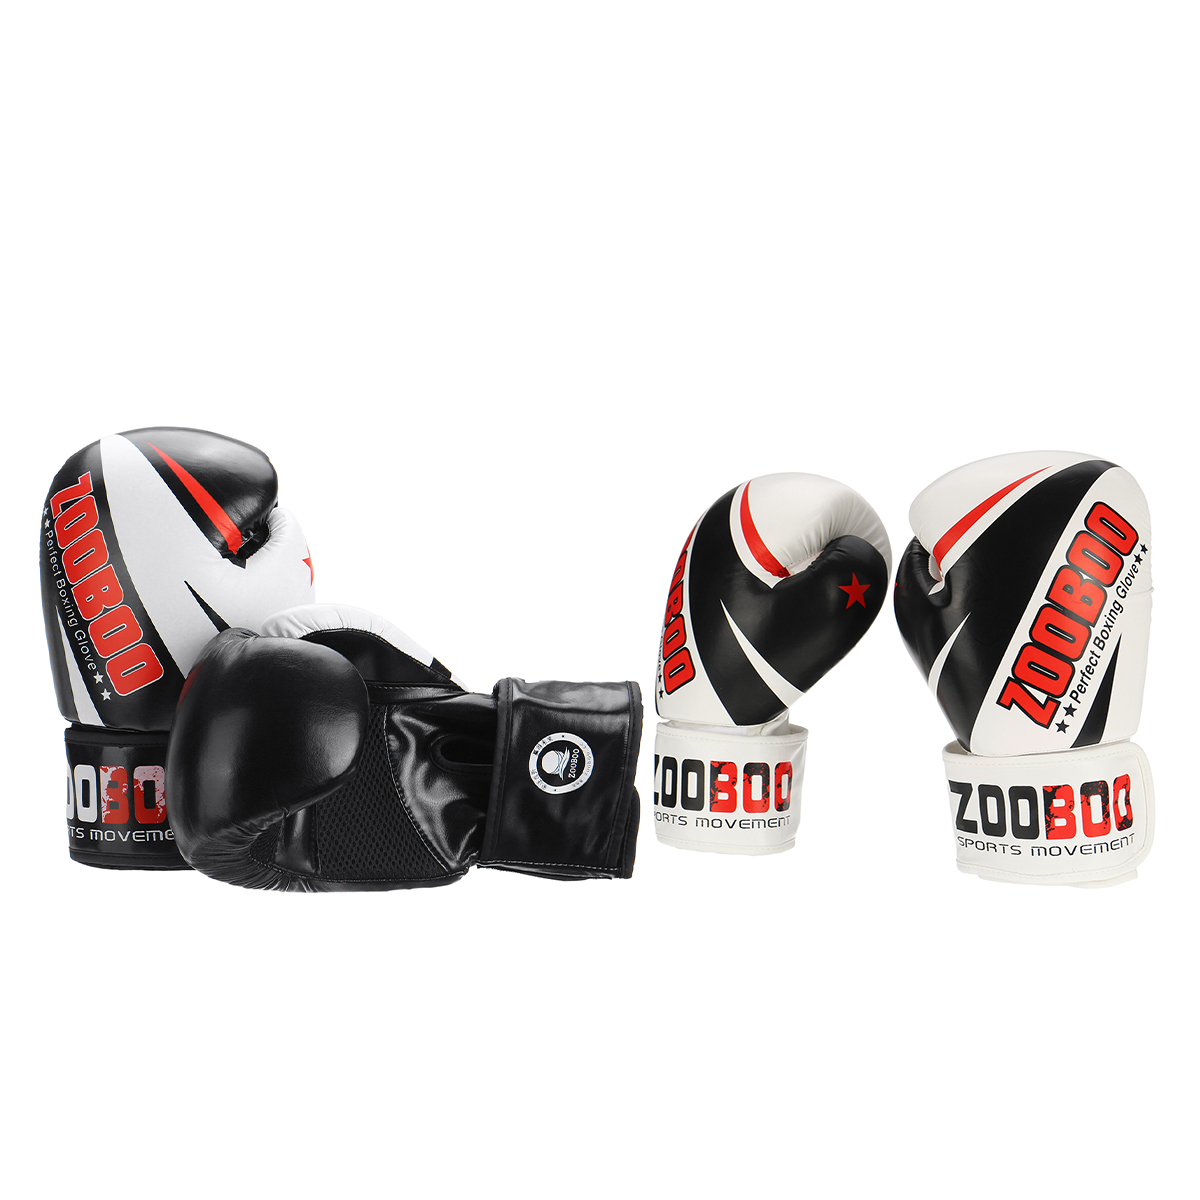 1-Pair-Adult-Boxing-Gloves-Professional-Mesh-Breathable-PU-Leather-Gloves-Sanda-Boxing-Training-Acce-1676767-13